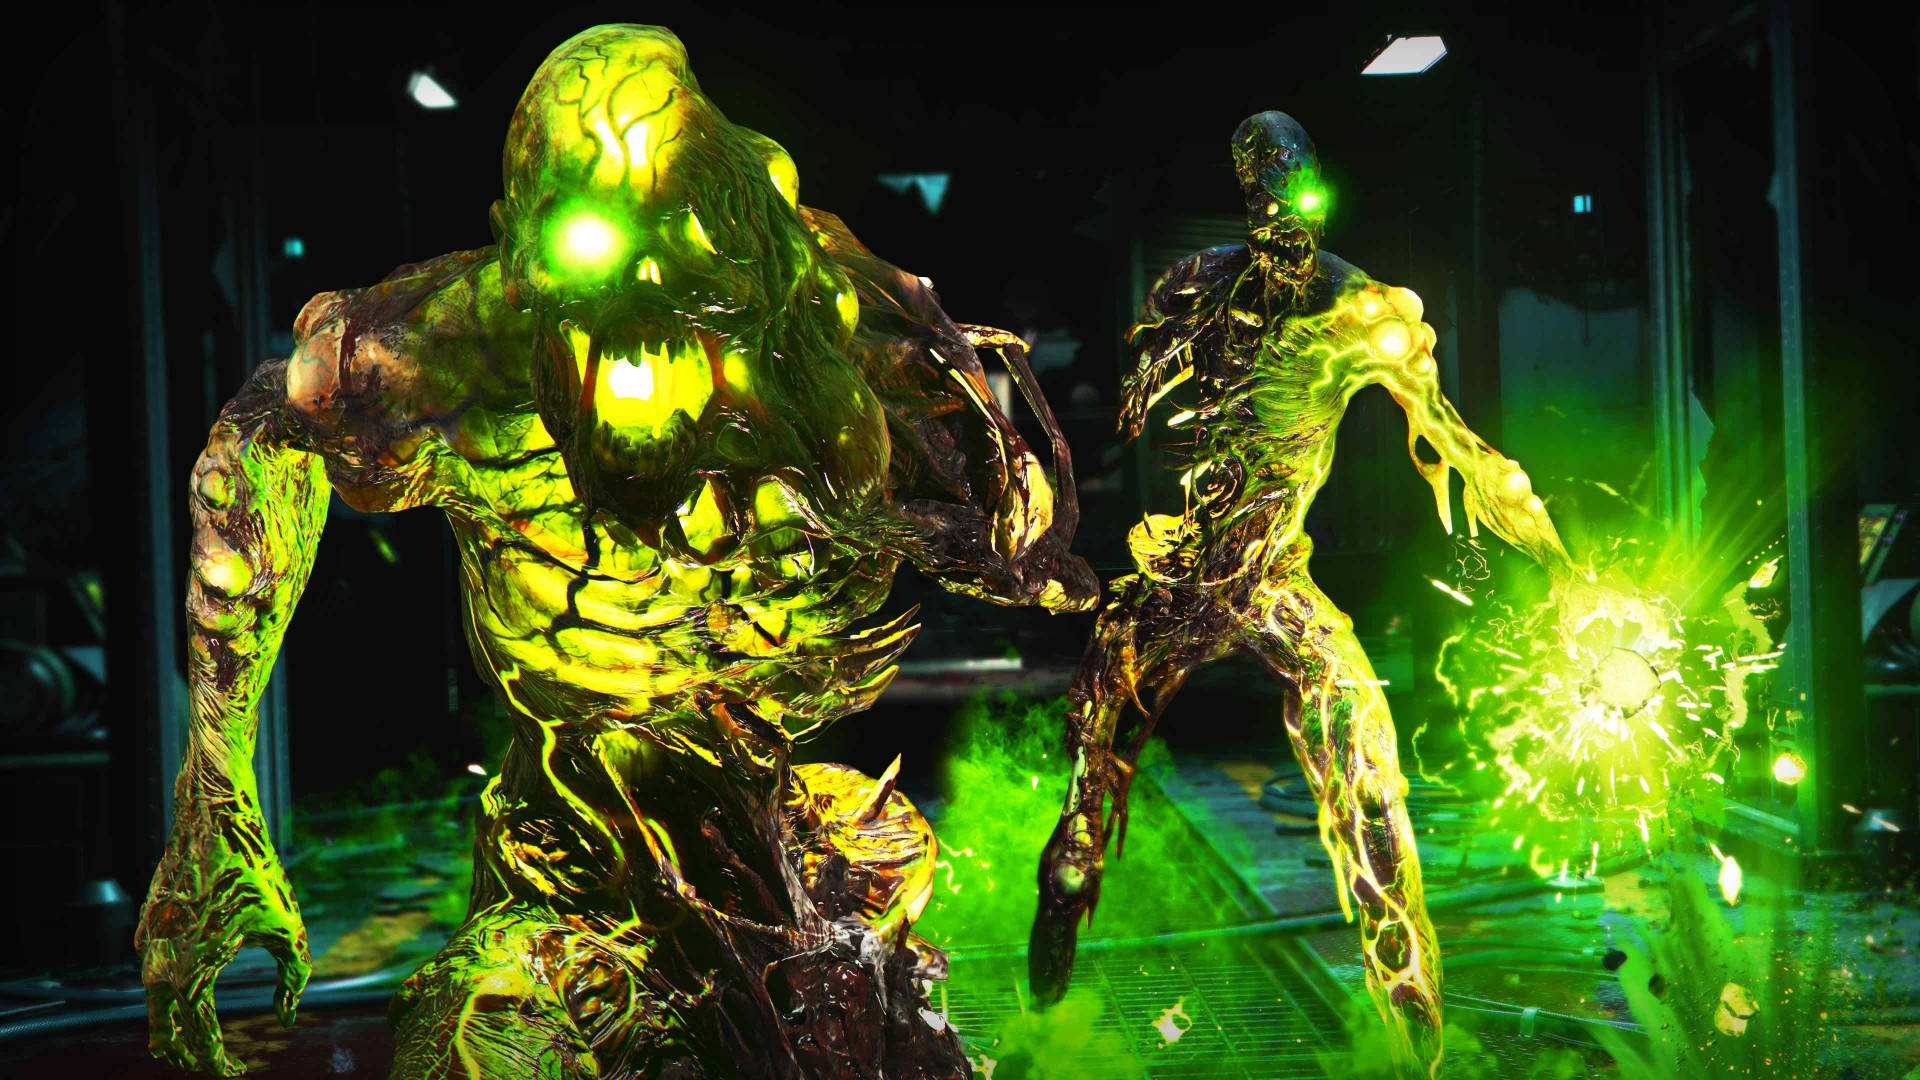 Two very irradiated zombies, one charging an energy blast, from Call of Duty Black Ops Cold War.